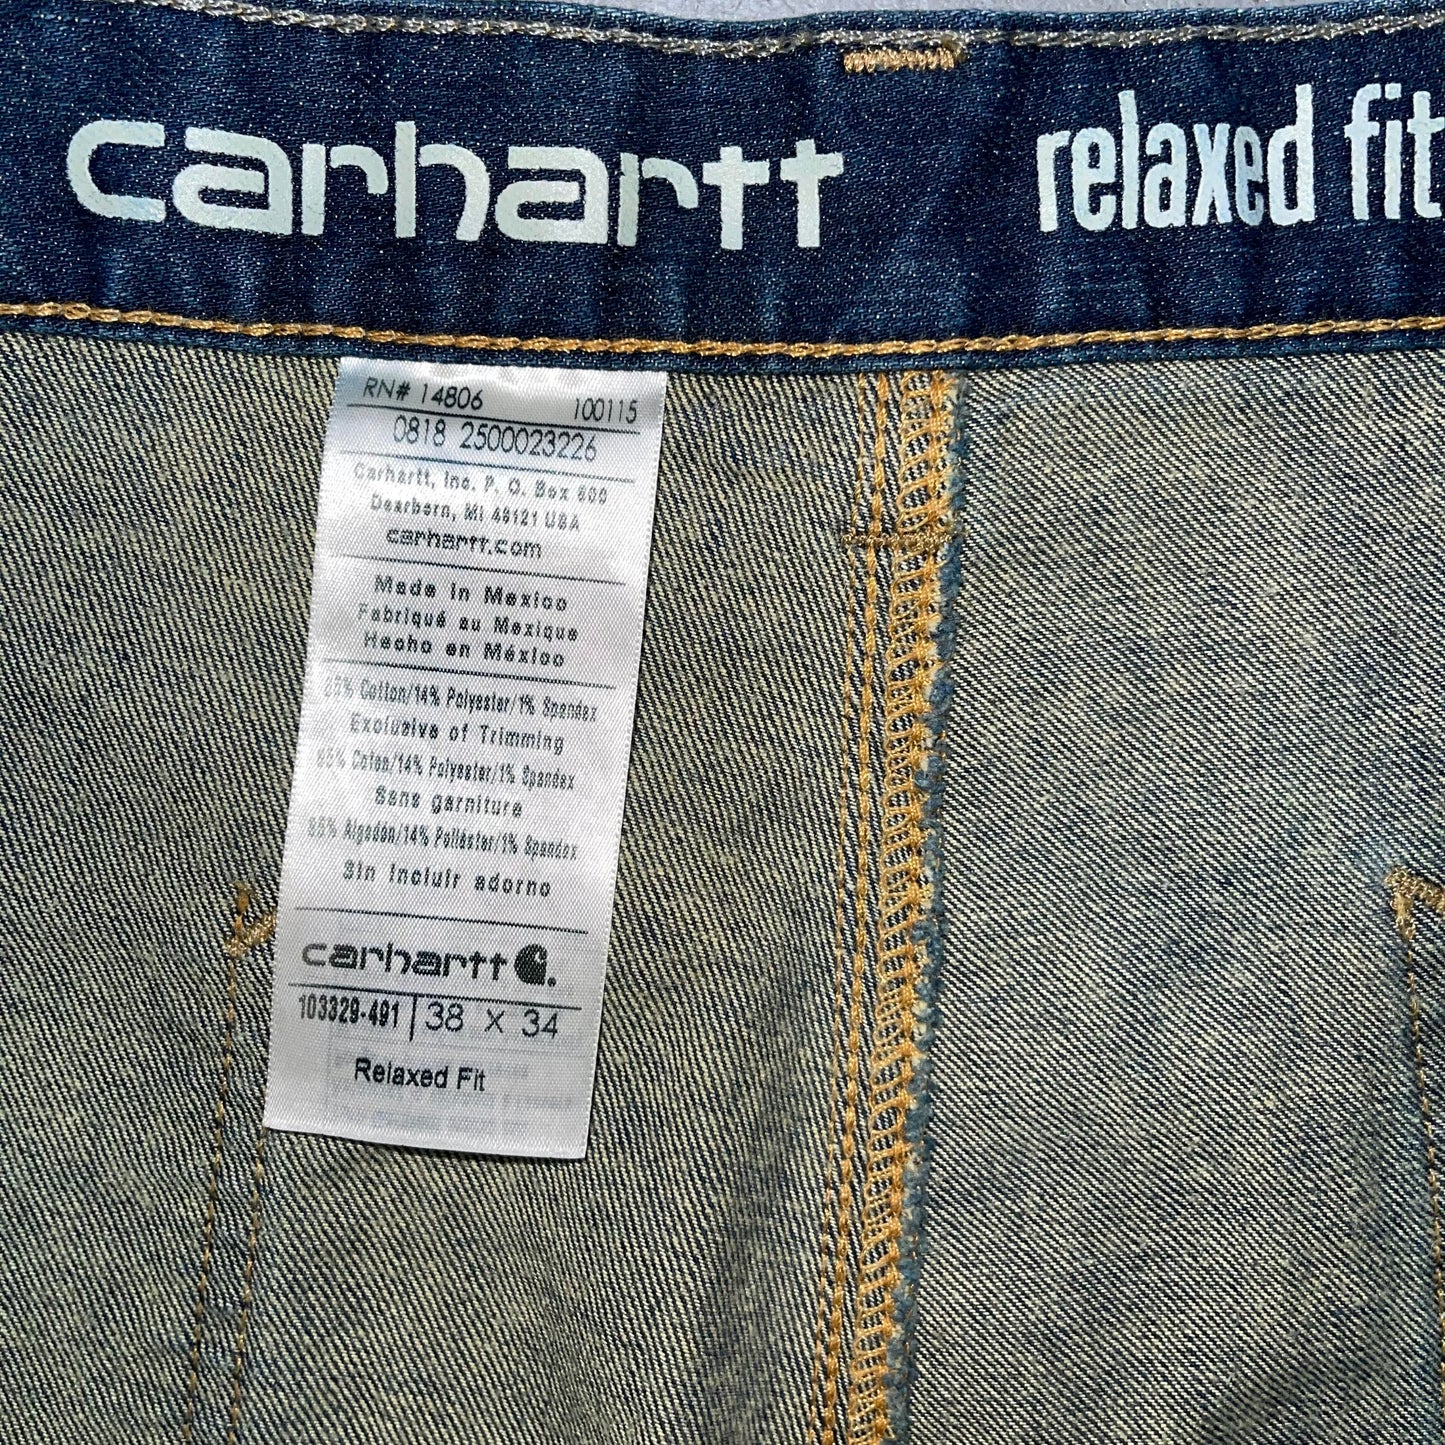 Carhartt Relaxed Fit Double Knee Jeans. Size 38x34